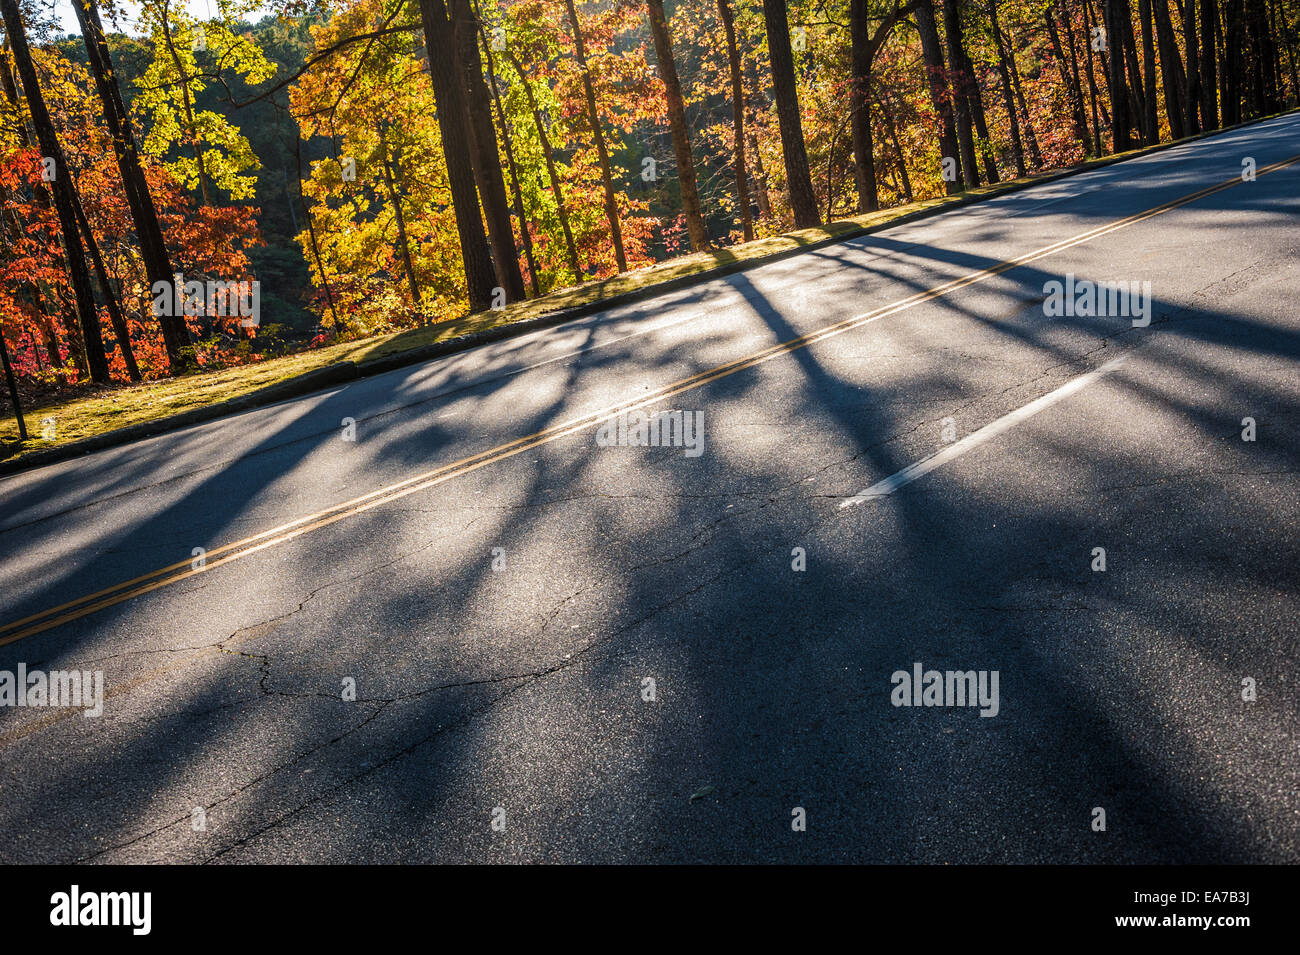 Sunlit trees with vivid autumn leaves cast long shadows across a road in Atlanta's scenic Stone Mountain Park. USA. Stock Photo